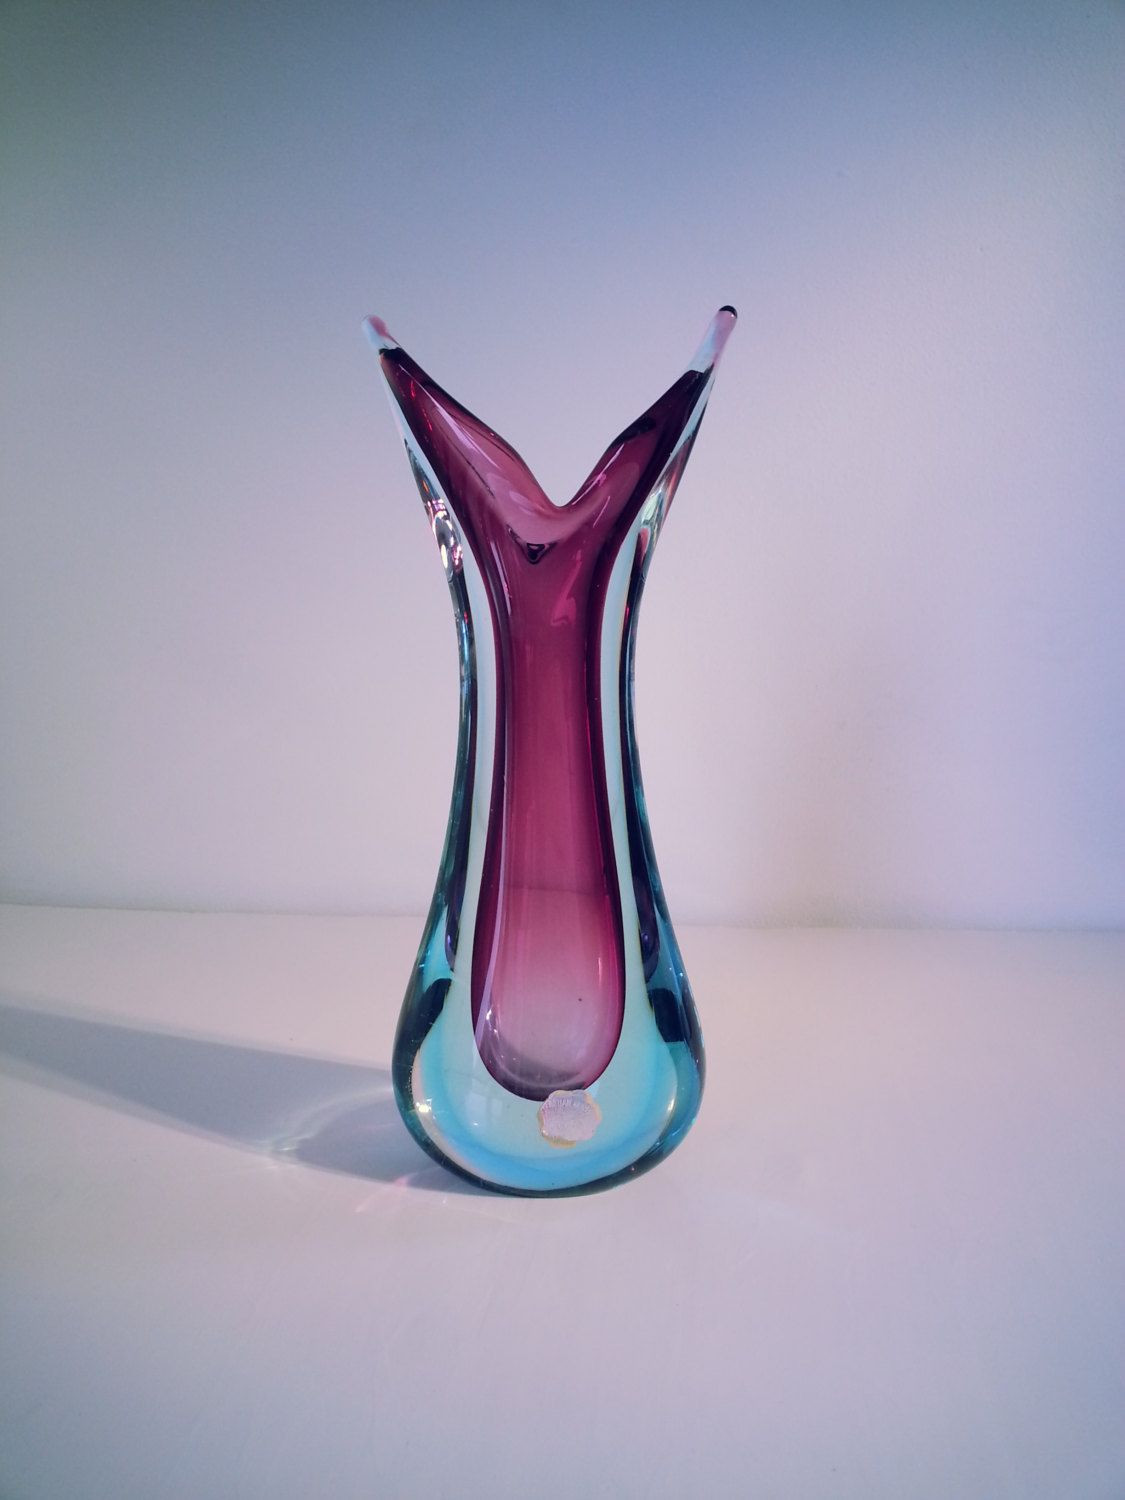 30 Perfect Colored Glass Vases Cheap 2024 free download colored glass vases cheap of murano sommerso genuine venetian glass 1950s 1960s purple blue within murano sommerso genuine venetian glass 1950s 1960s purple blue glass vase pulled design vas